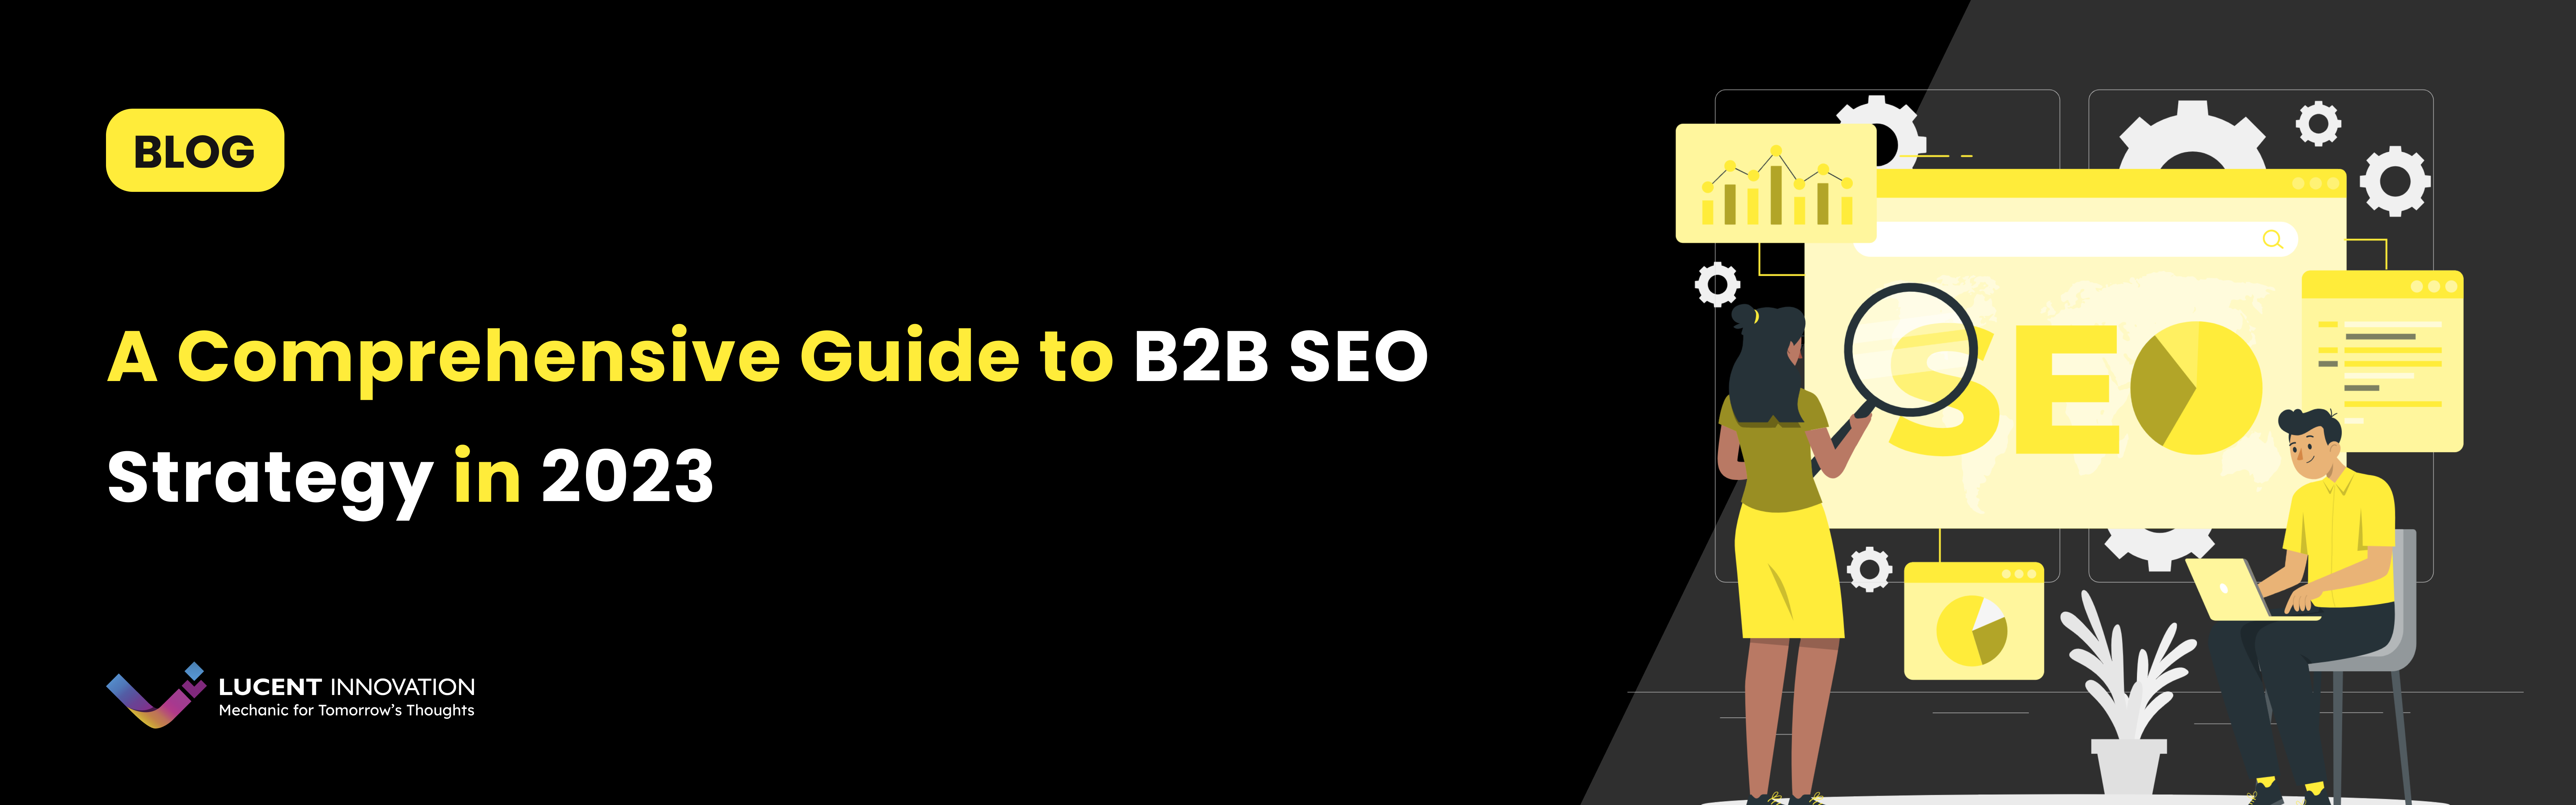 A Comprehensive Guide to B2B SEO Strategy in 2023